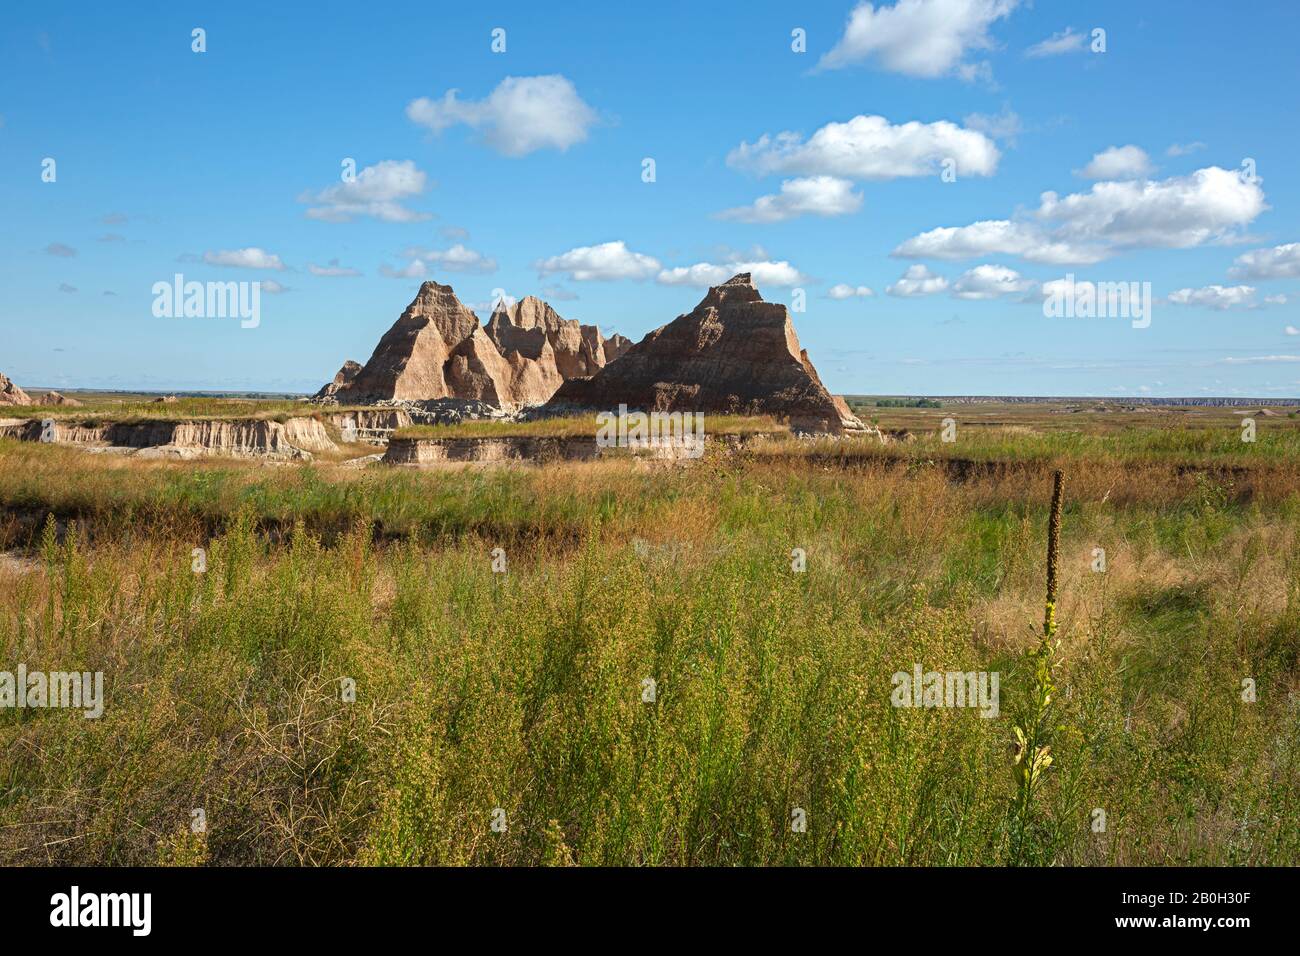 SD00141-00...SOUTH DAKOTA - The Great Plains and eroded buttes viewed from the Castle Trail in Badlands National Park. Stock Photo